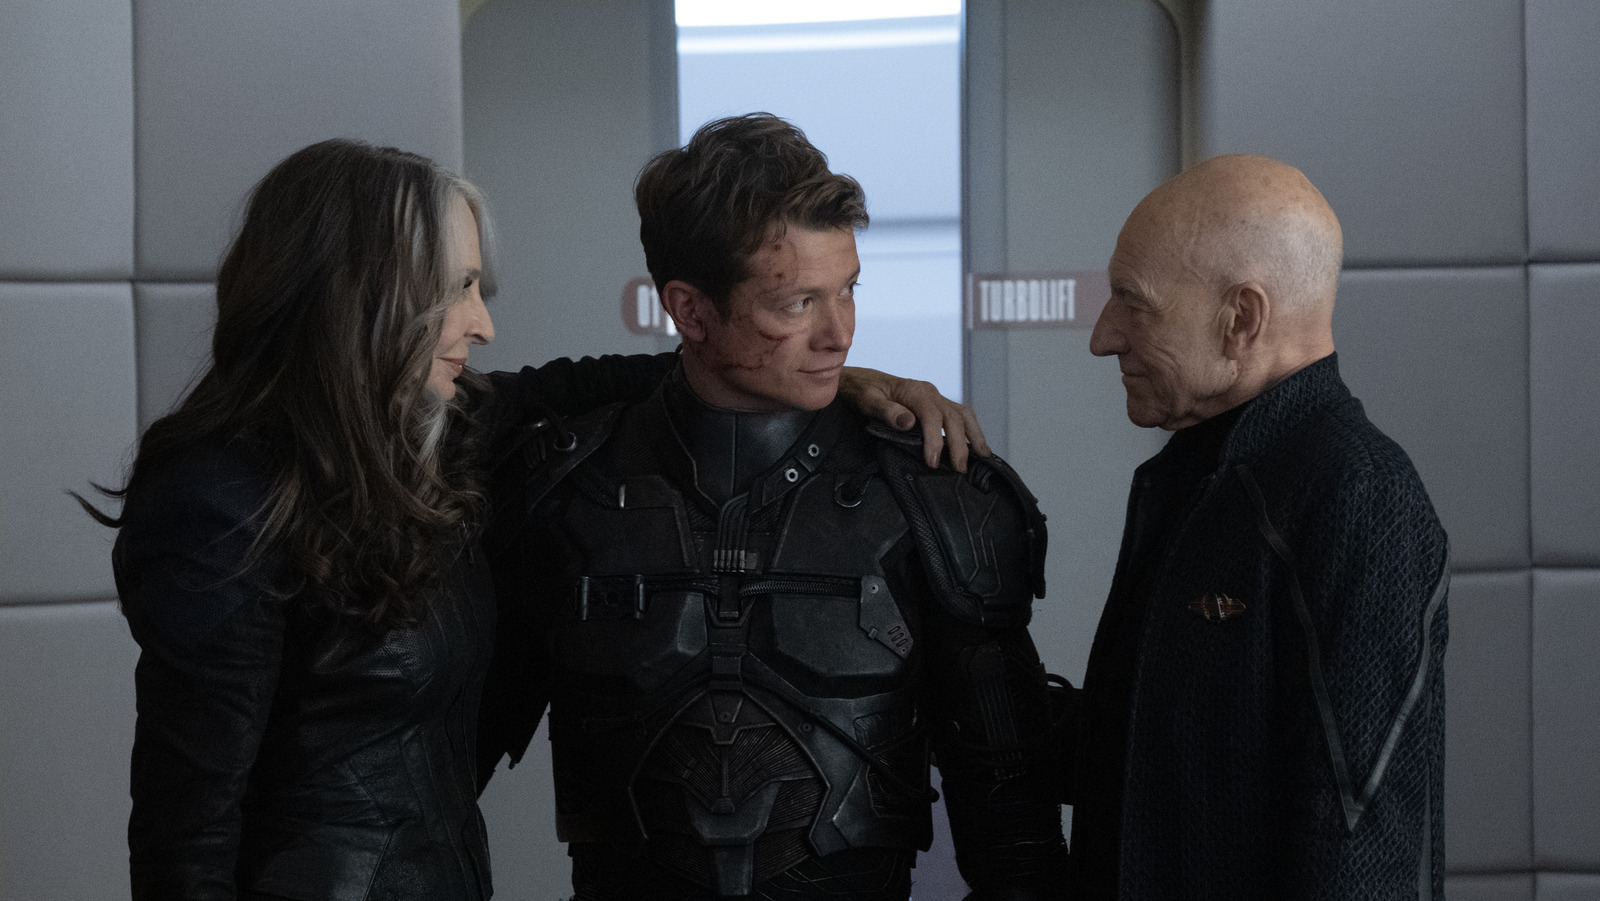 Picard's Ed Speleers struggled on and off screen during season 3